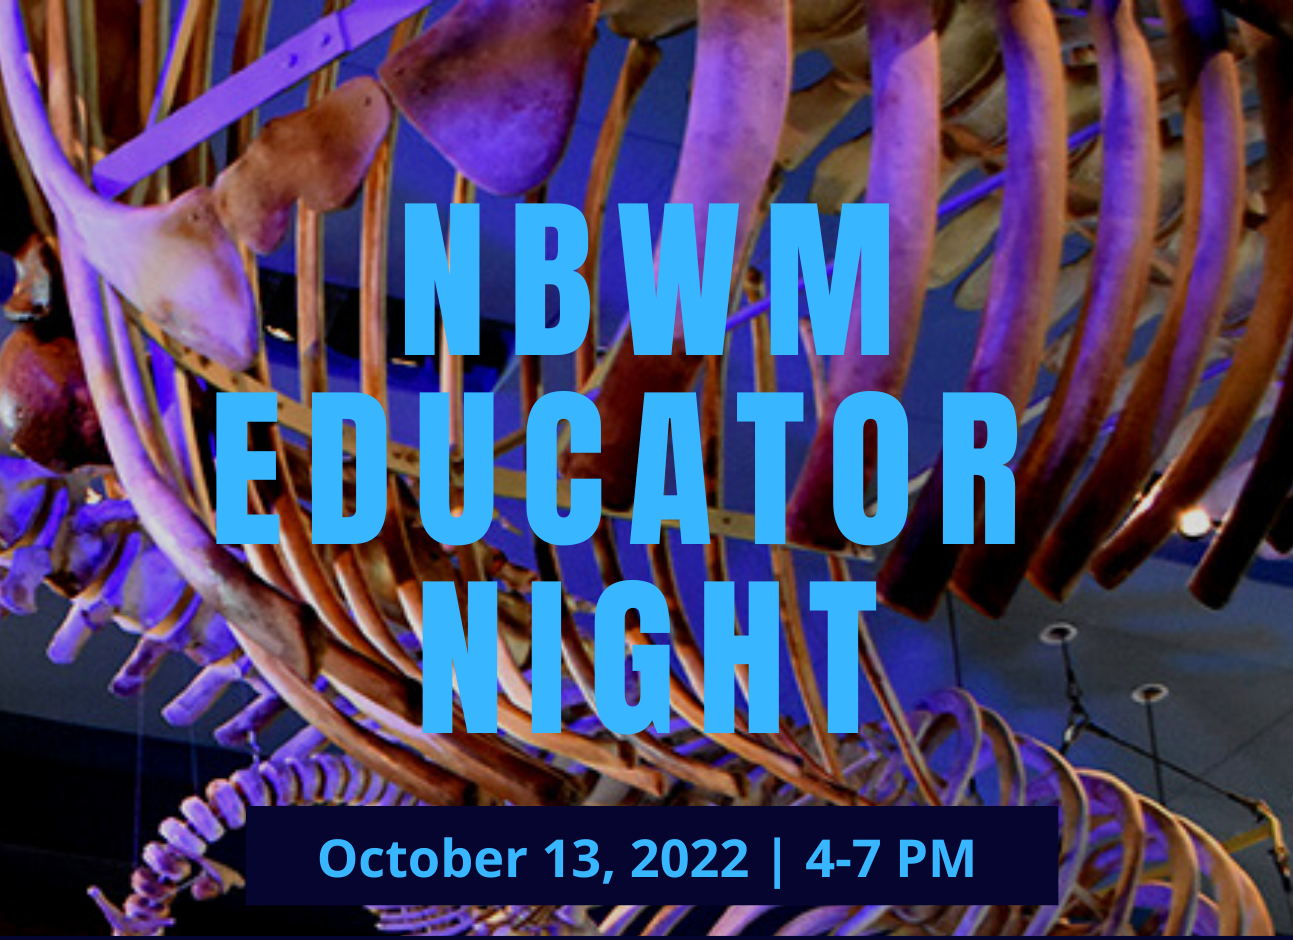 Educator Night image for website w date